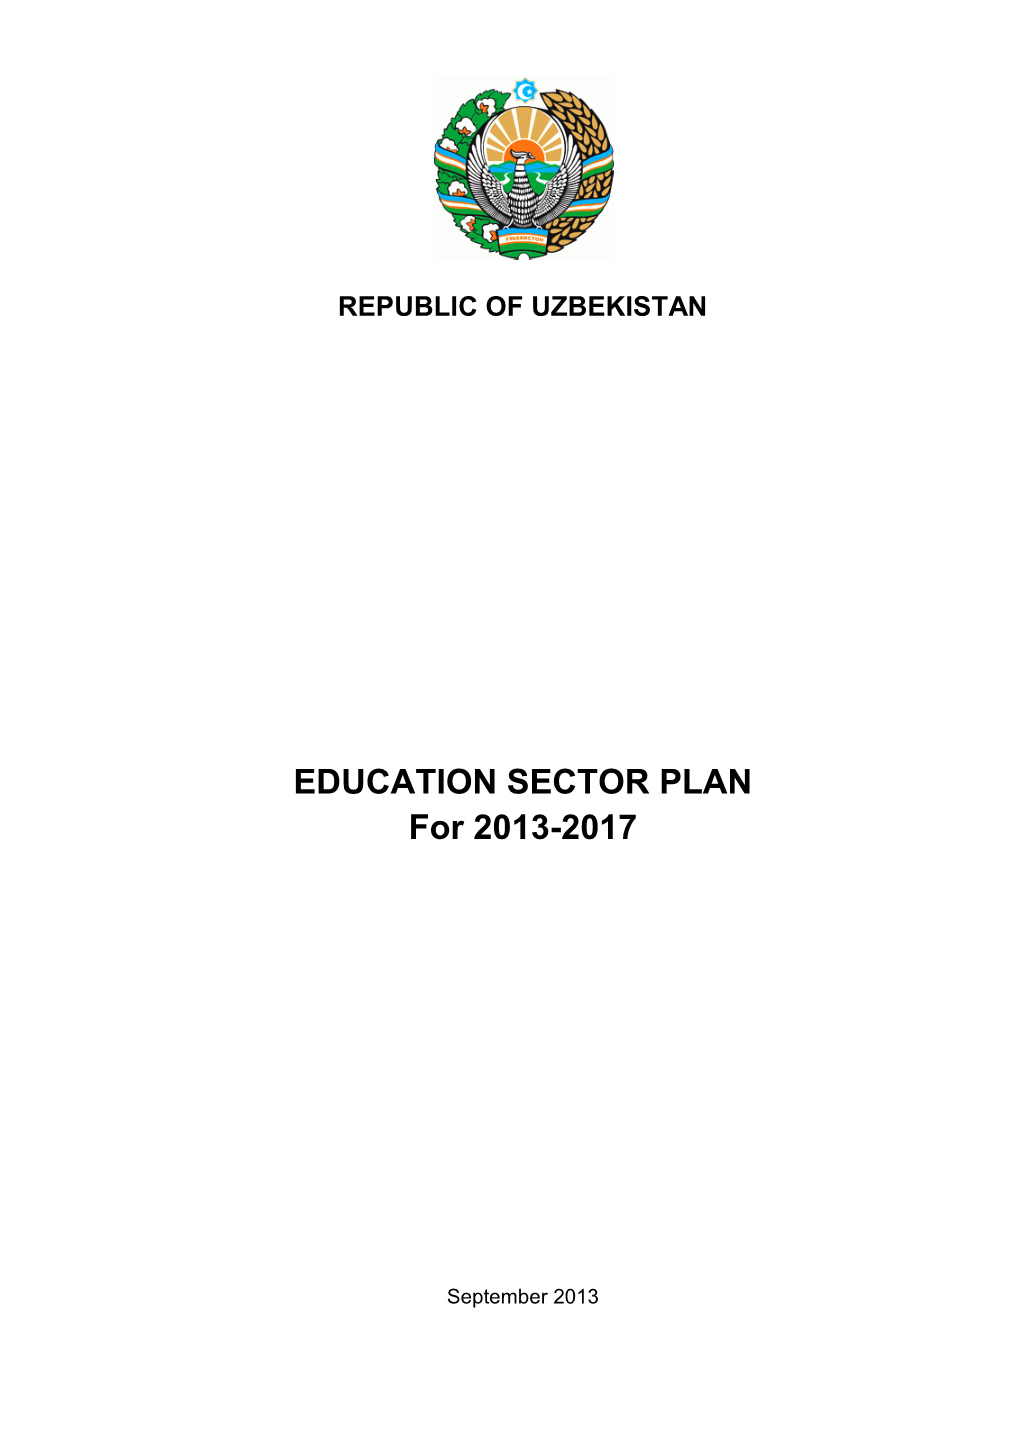 EDUCATION SECTOR PLAN for 2013-2017